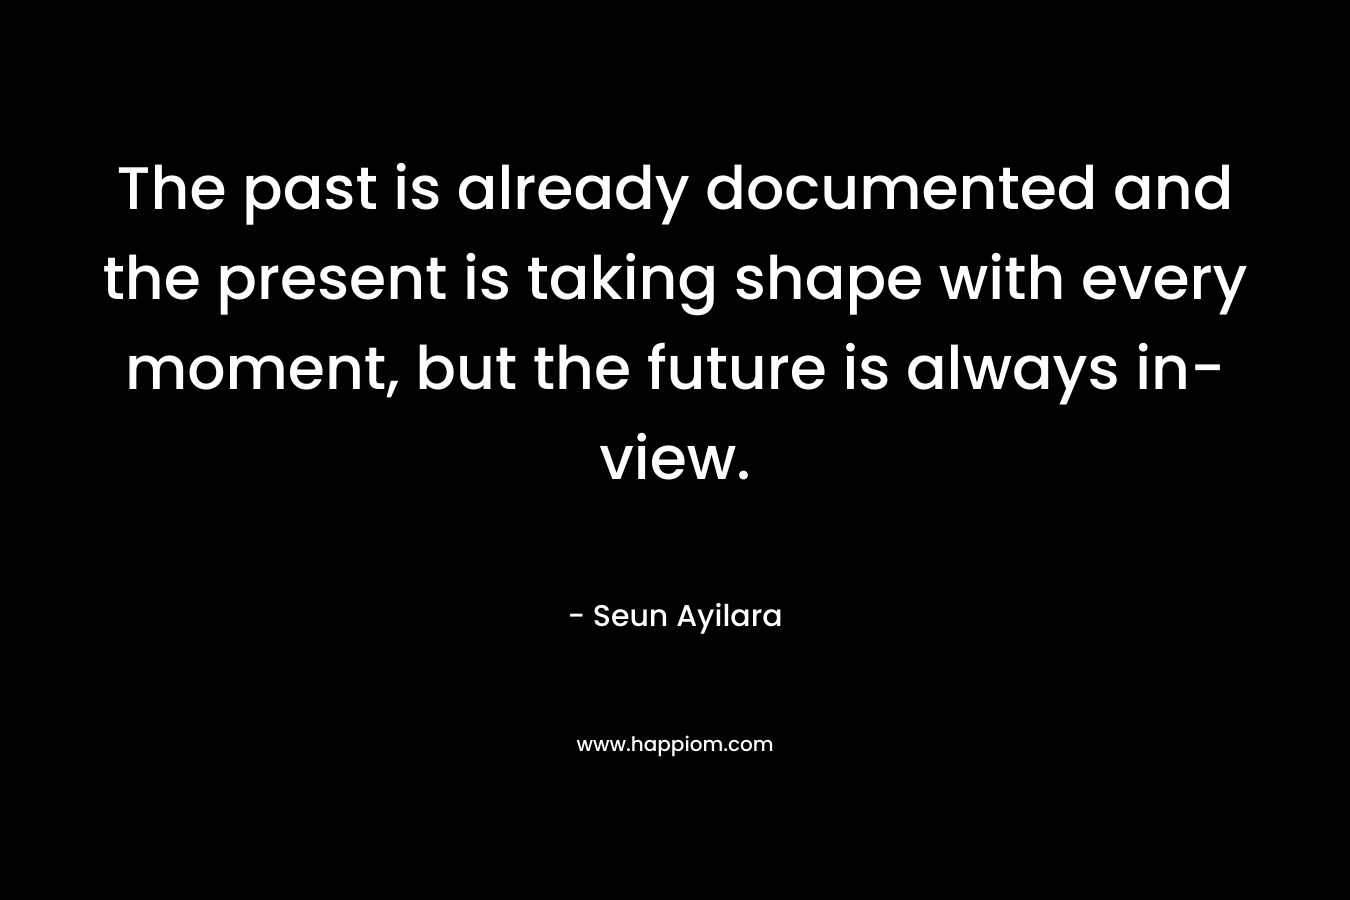 The past is already documented and the present is taking shape with every moment, but the future is always in-view.